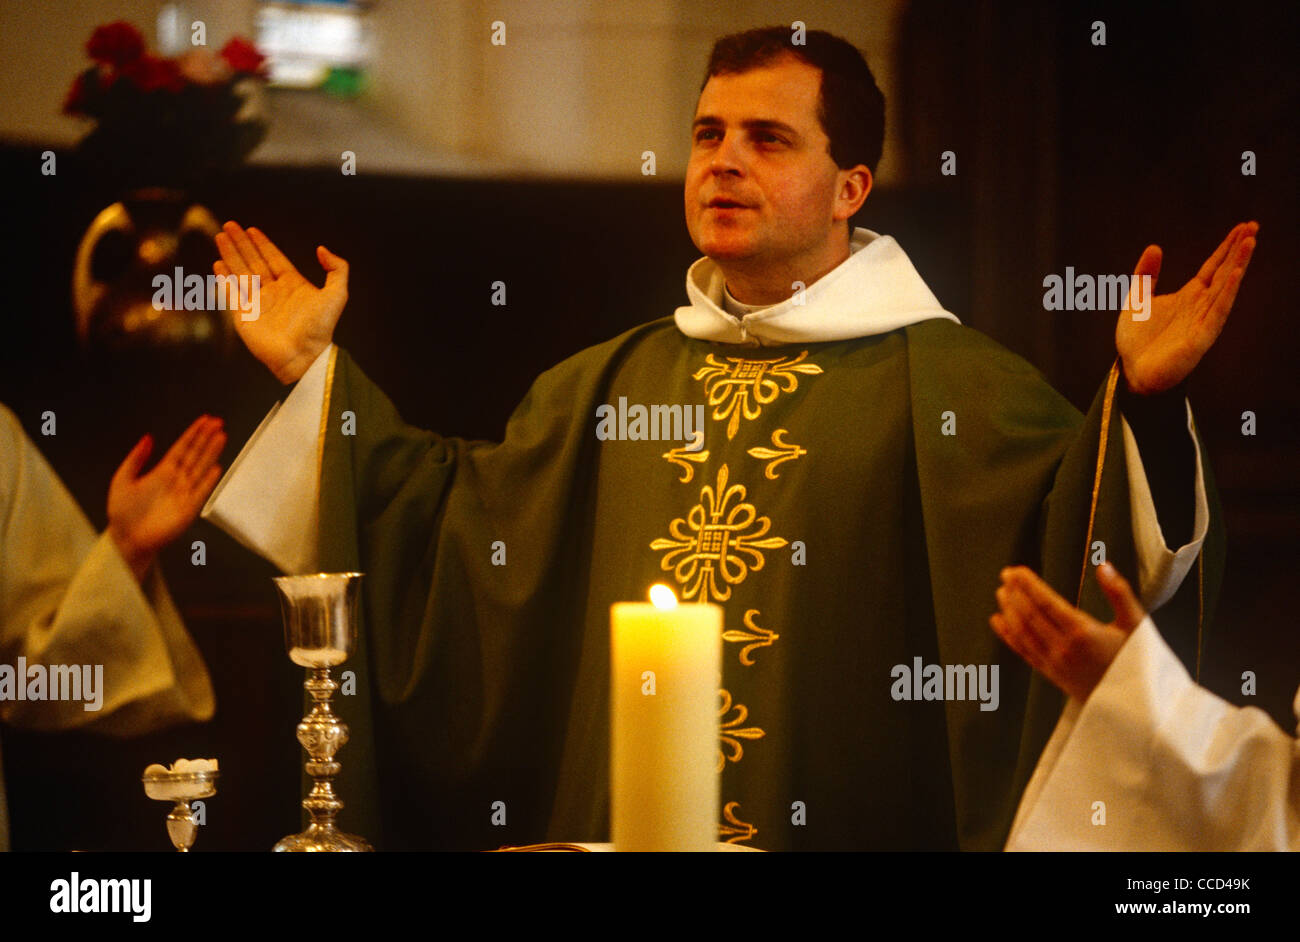 Father Phillipe Dubos, a catholic priest leads Sunday Mass in a local Catholic church in Le Neubourg, Normandy, France. Stock Photo